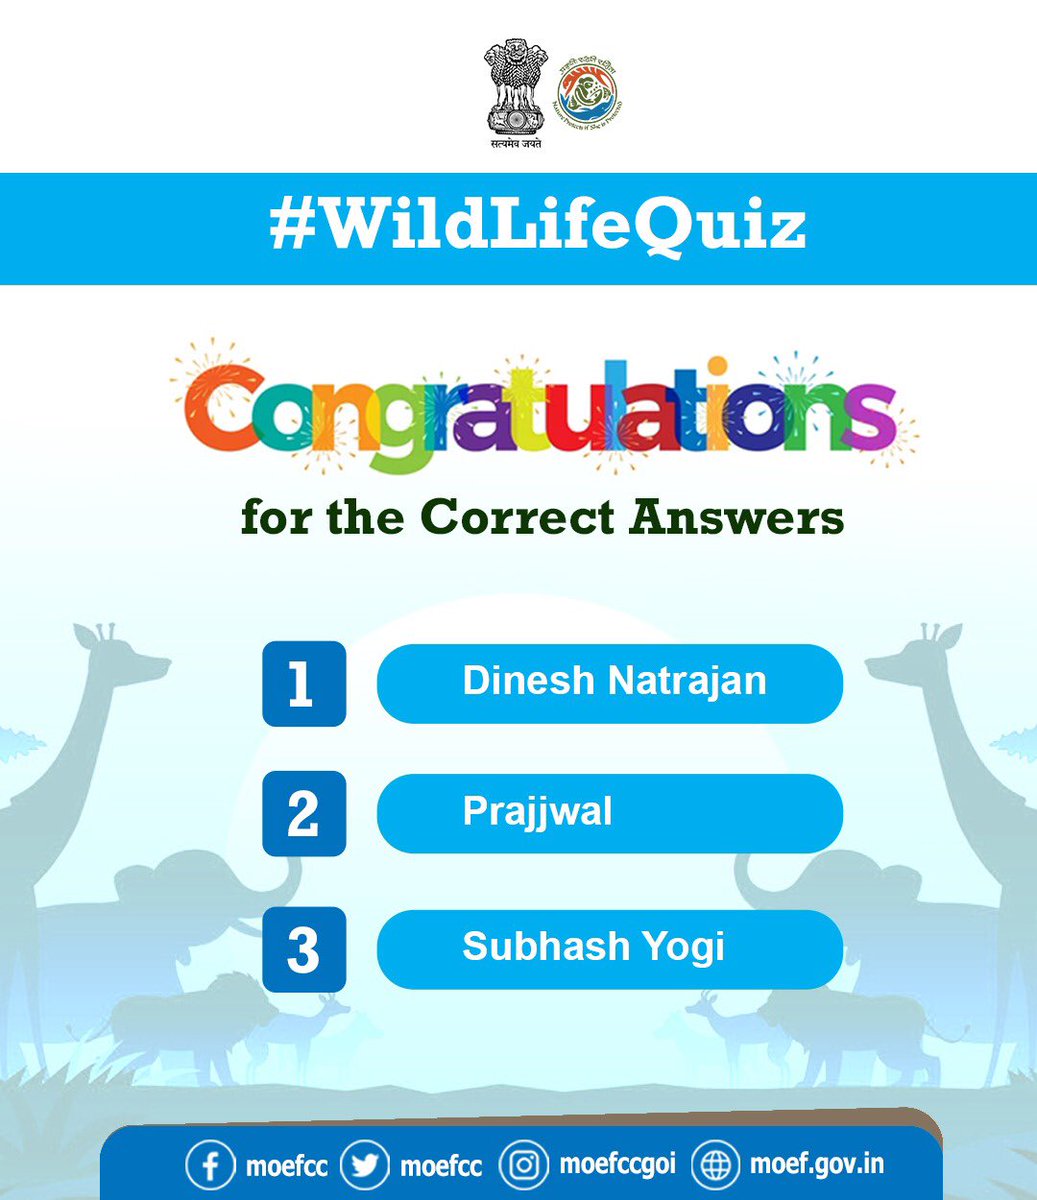 Here are our winners for the 1st round of #WildLifeQuiz